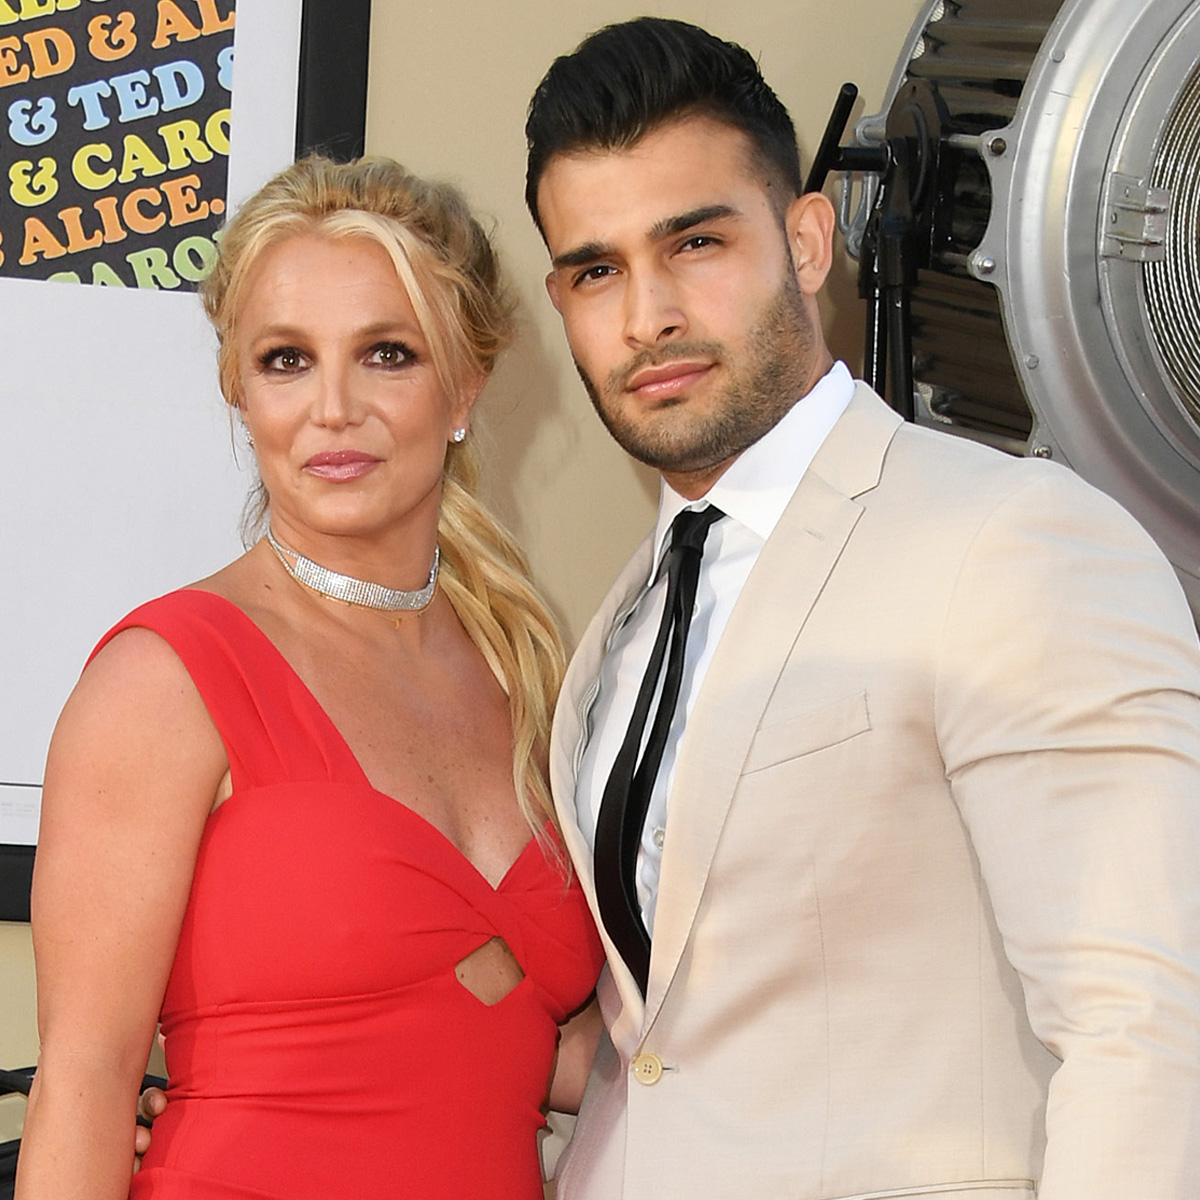 Britney Spears and Sam Asghari Announce That They Have "Lost Our Miracle Baby"